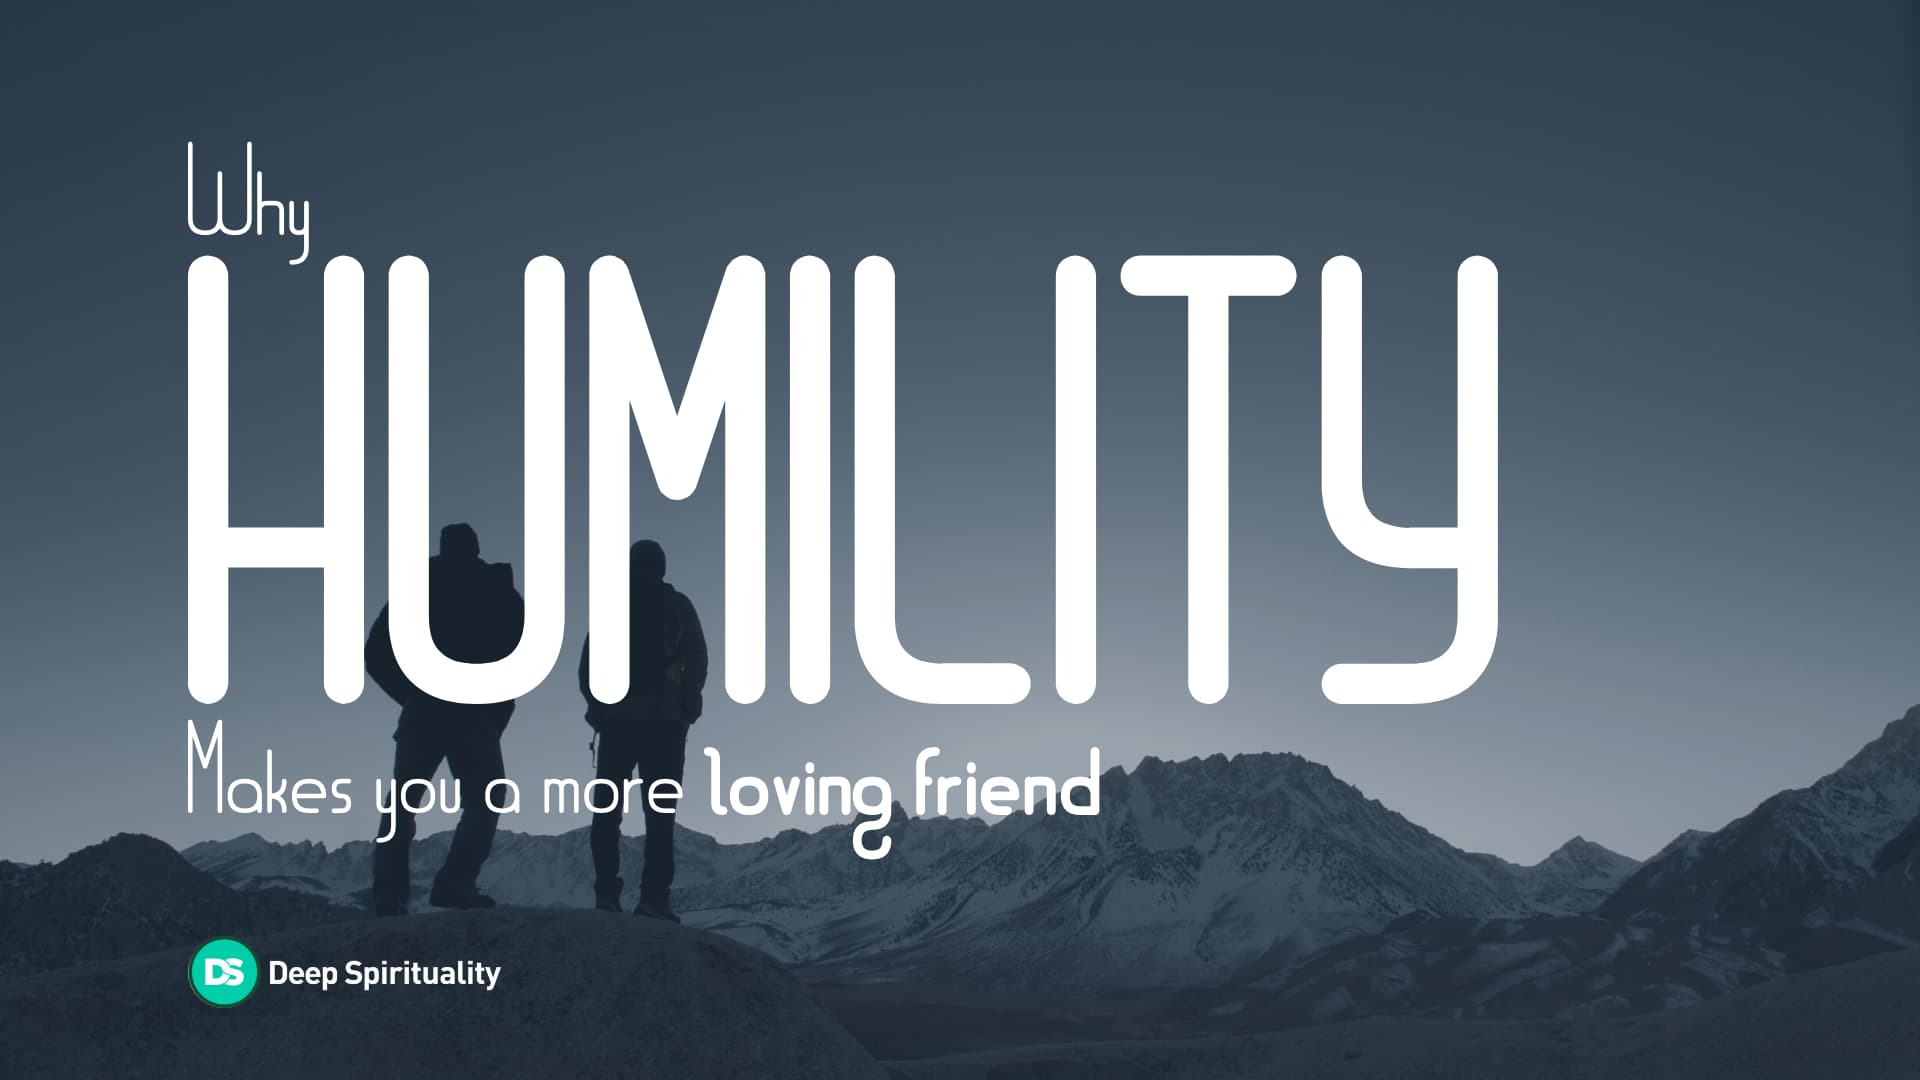 Why Humility Makes You a More Loving Friend 4